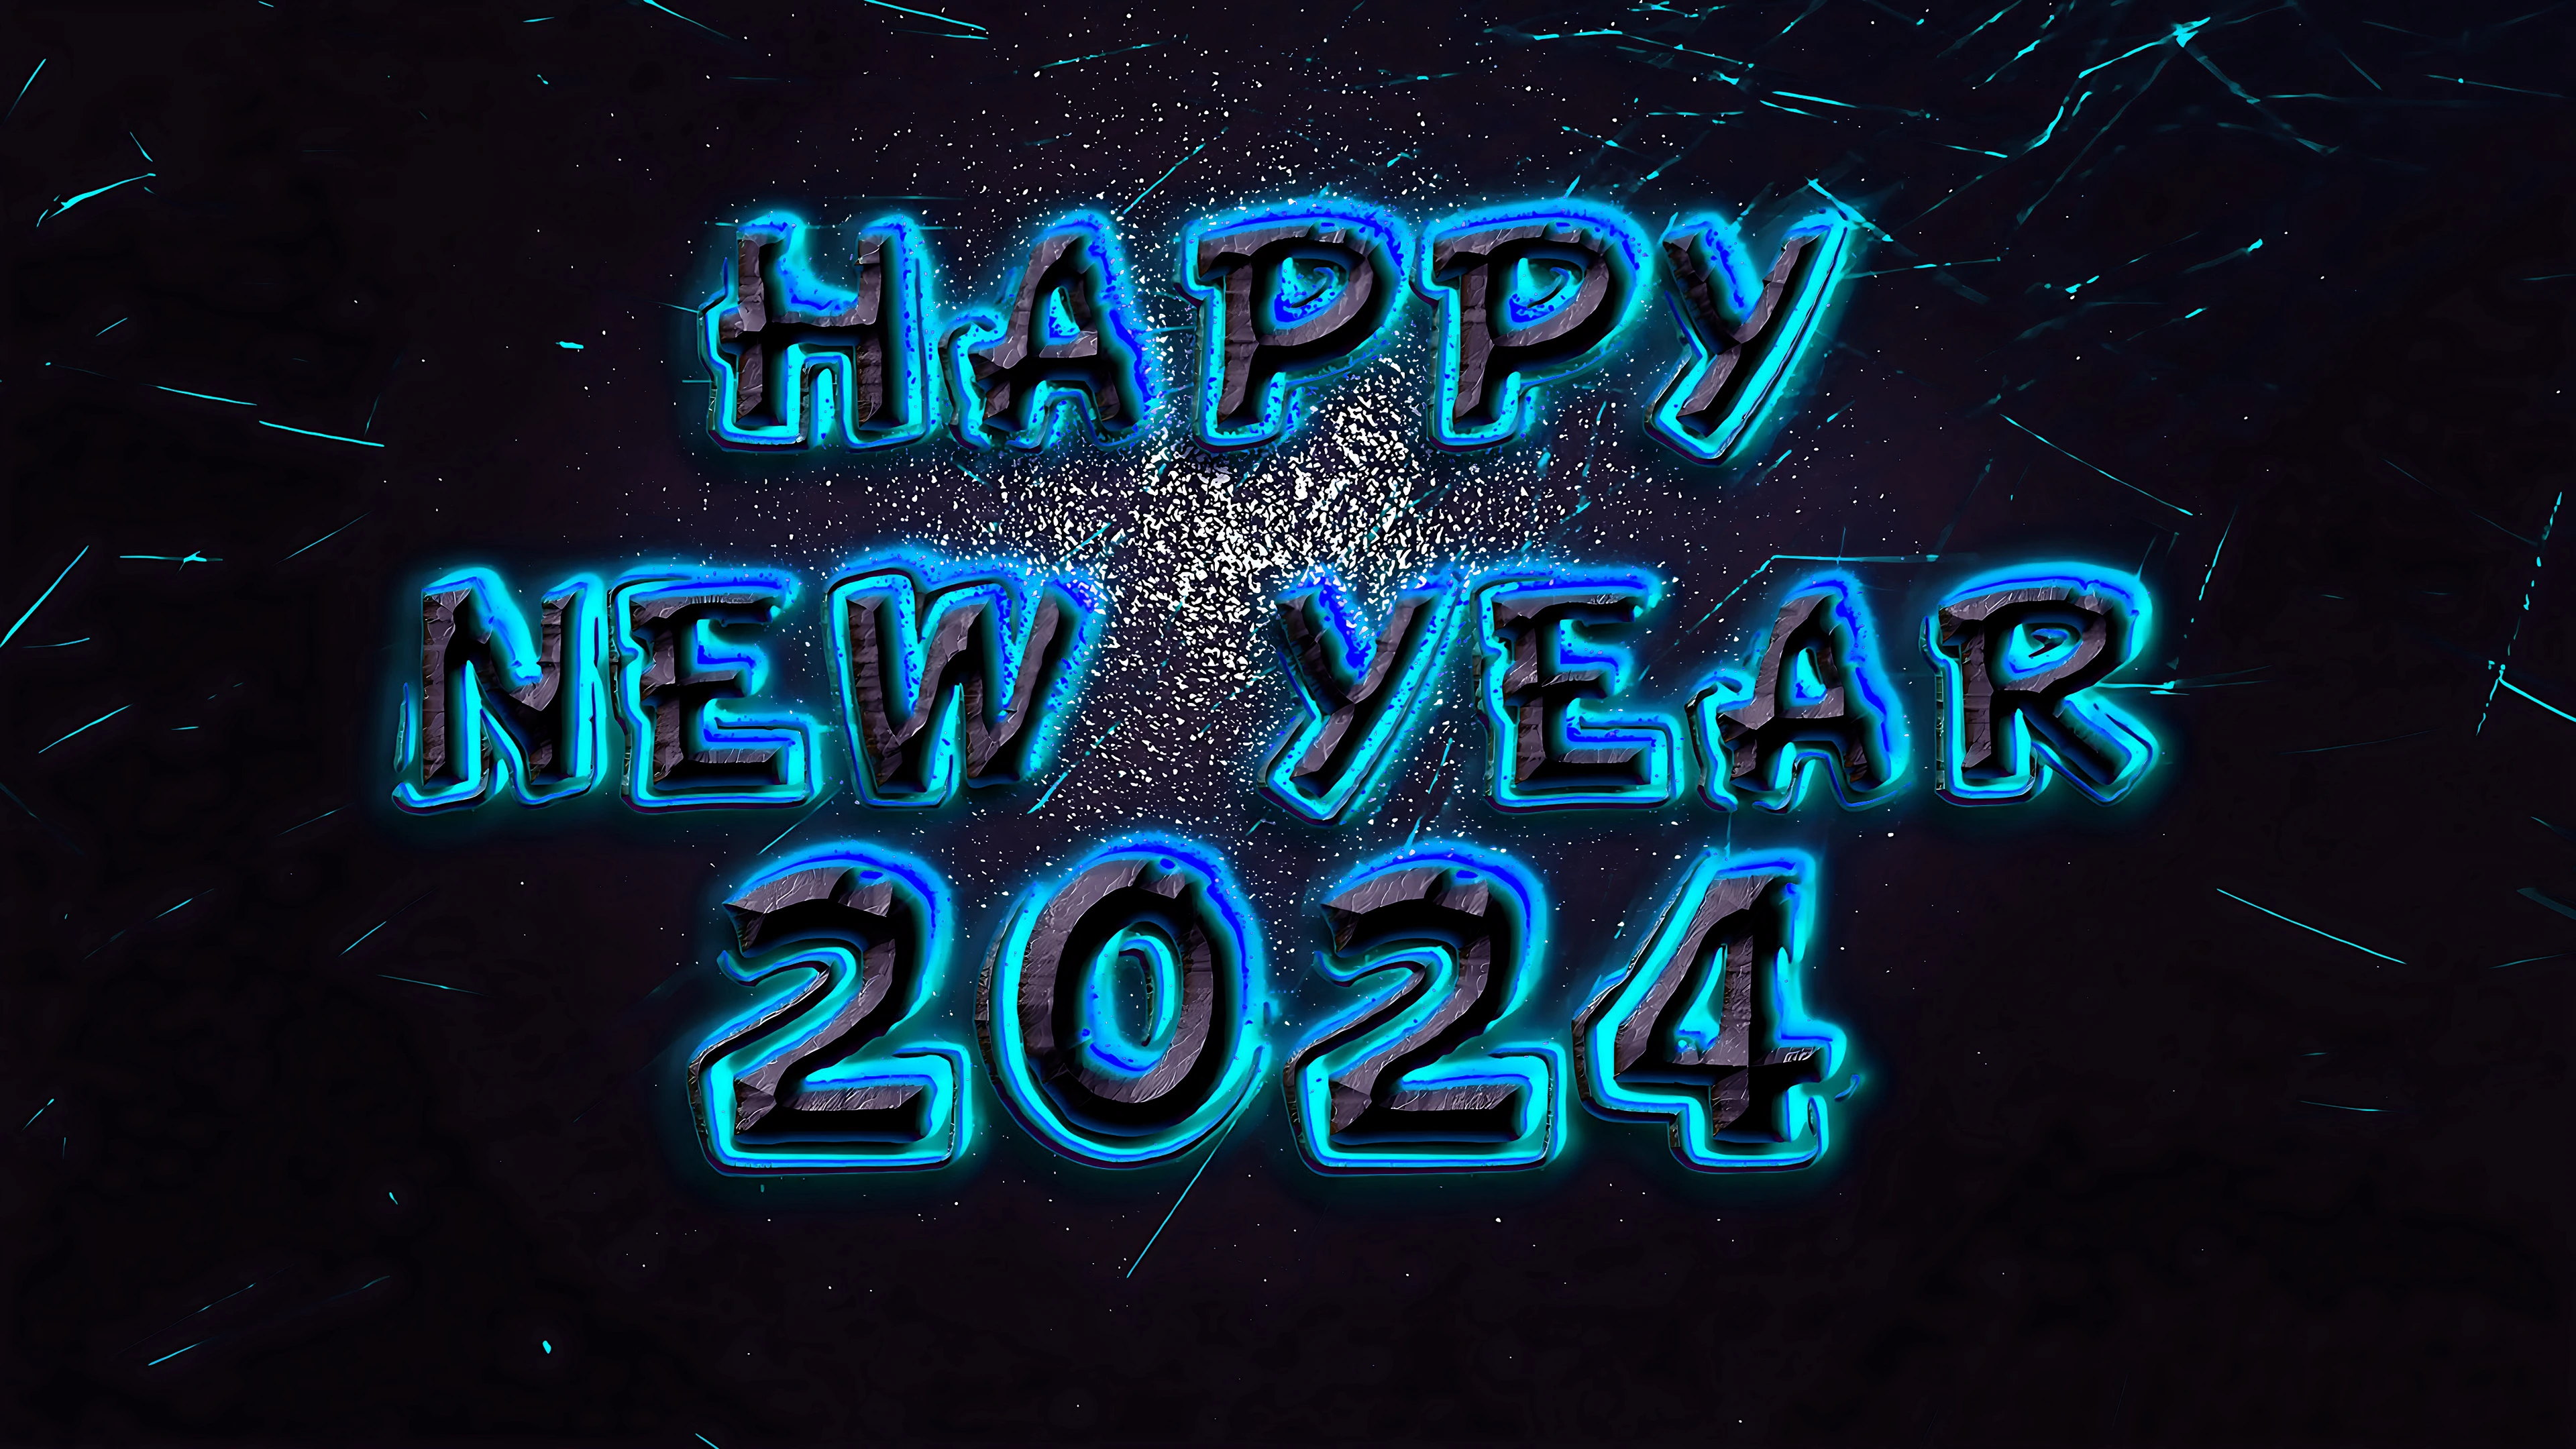 Happy New Year 2024 wallpapers with aqua color shadow effect on metal text. 4K Ultra HD image for desktop pc